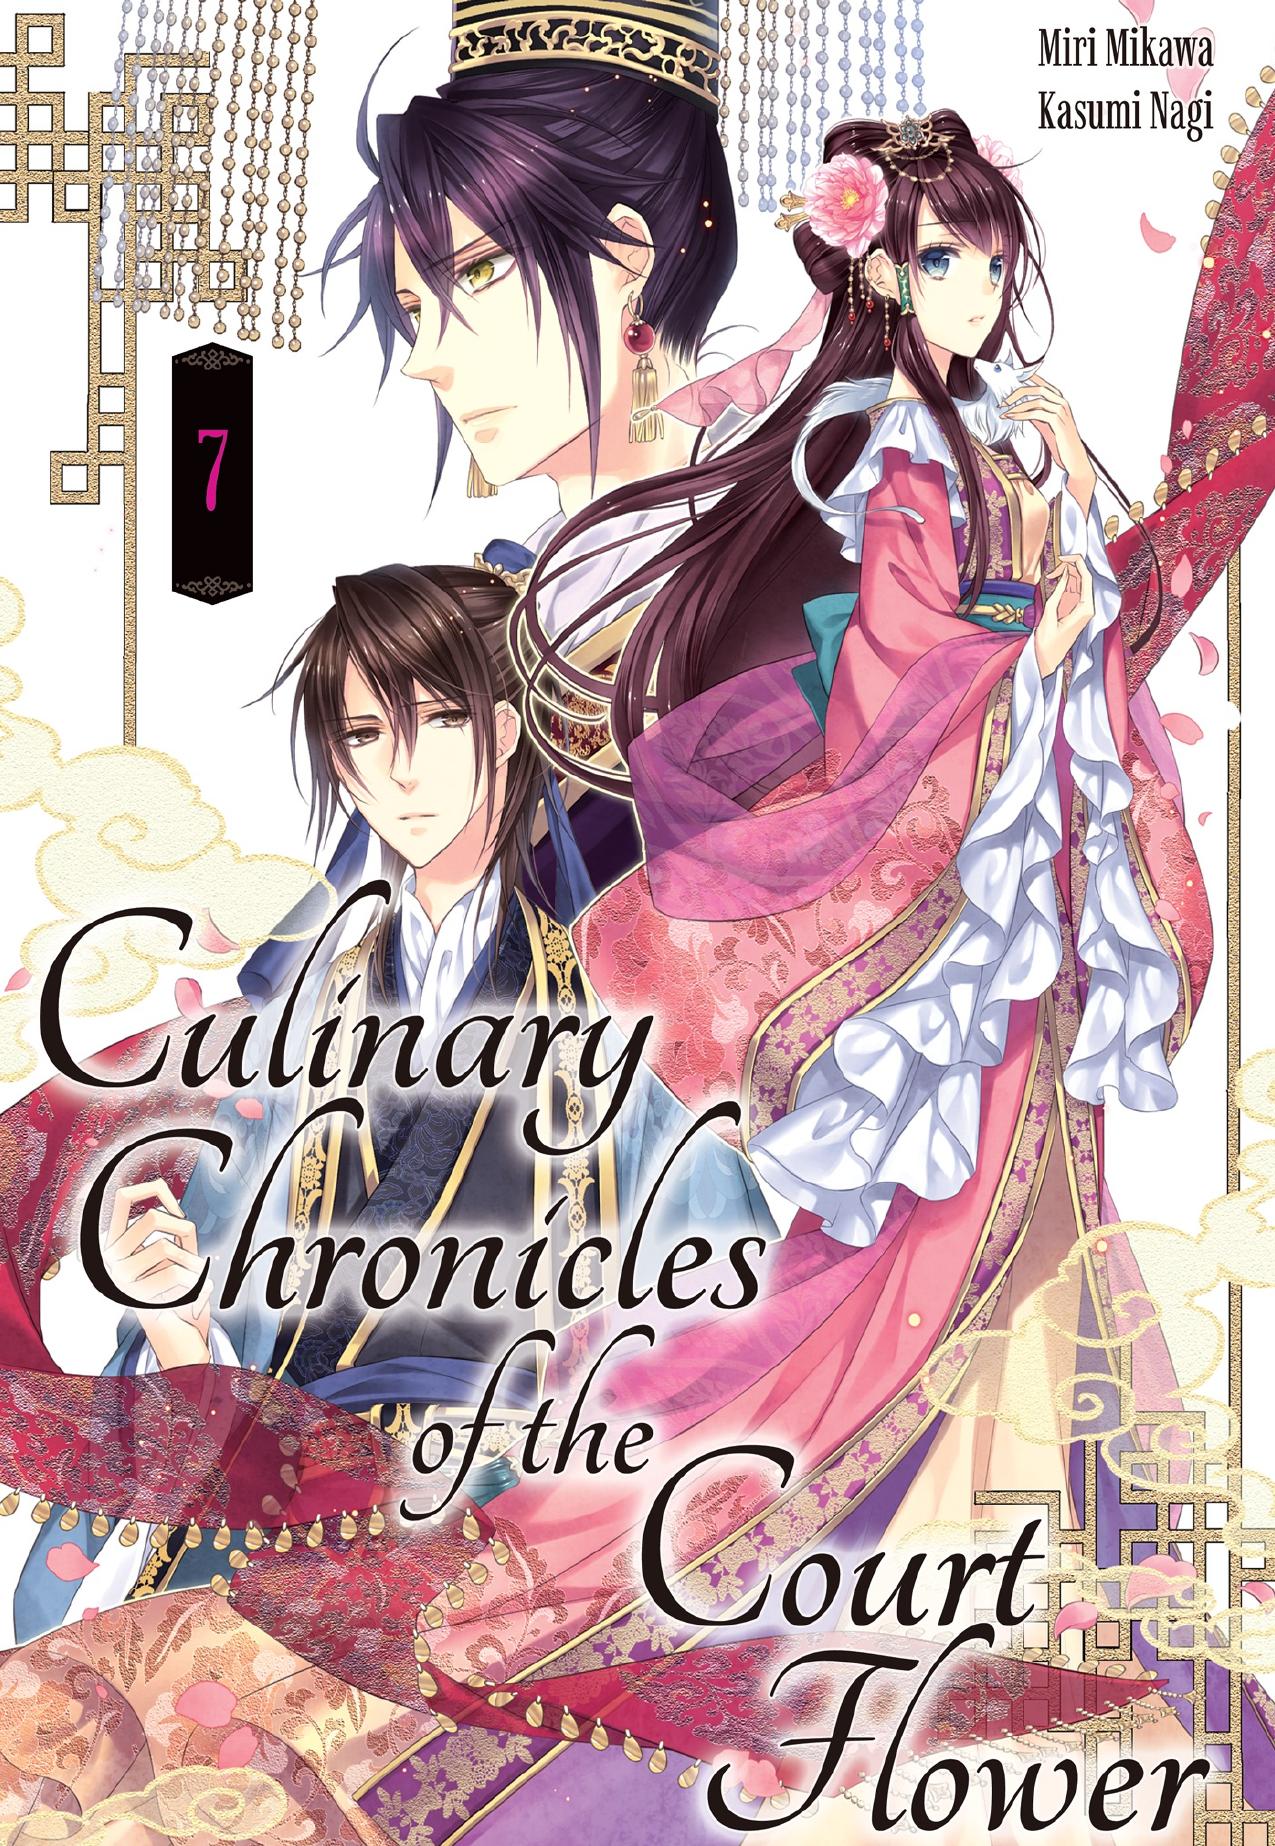 Culinary Chronicles of the Court Flower: Volume 7 by Miri Mikawa